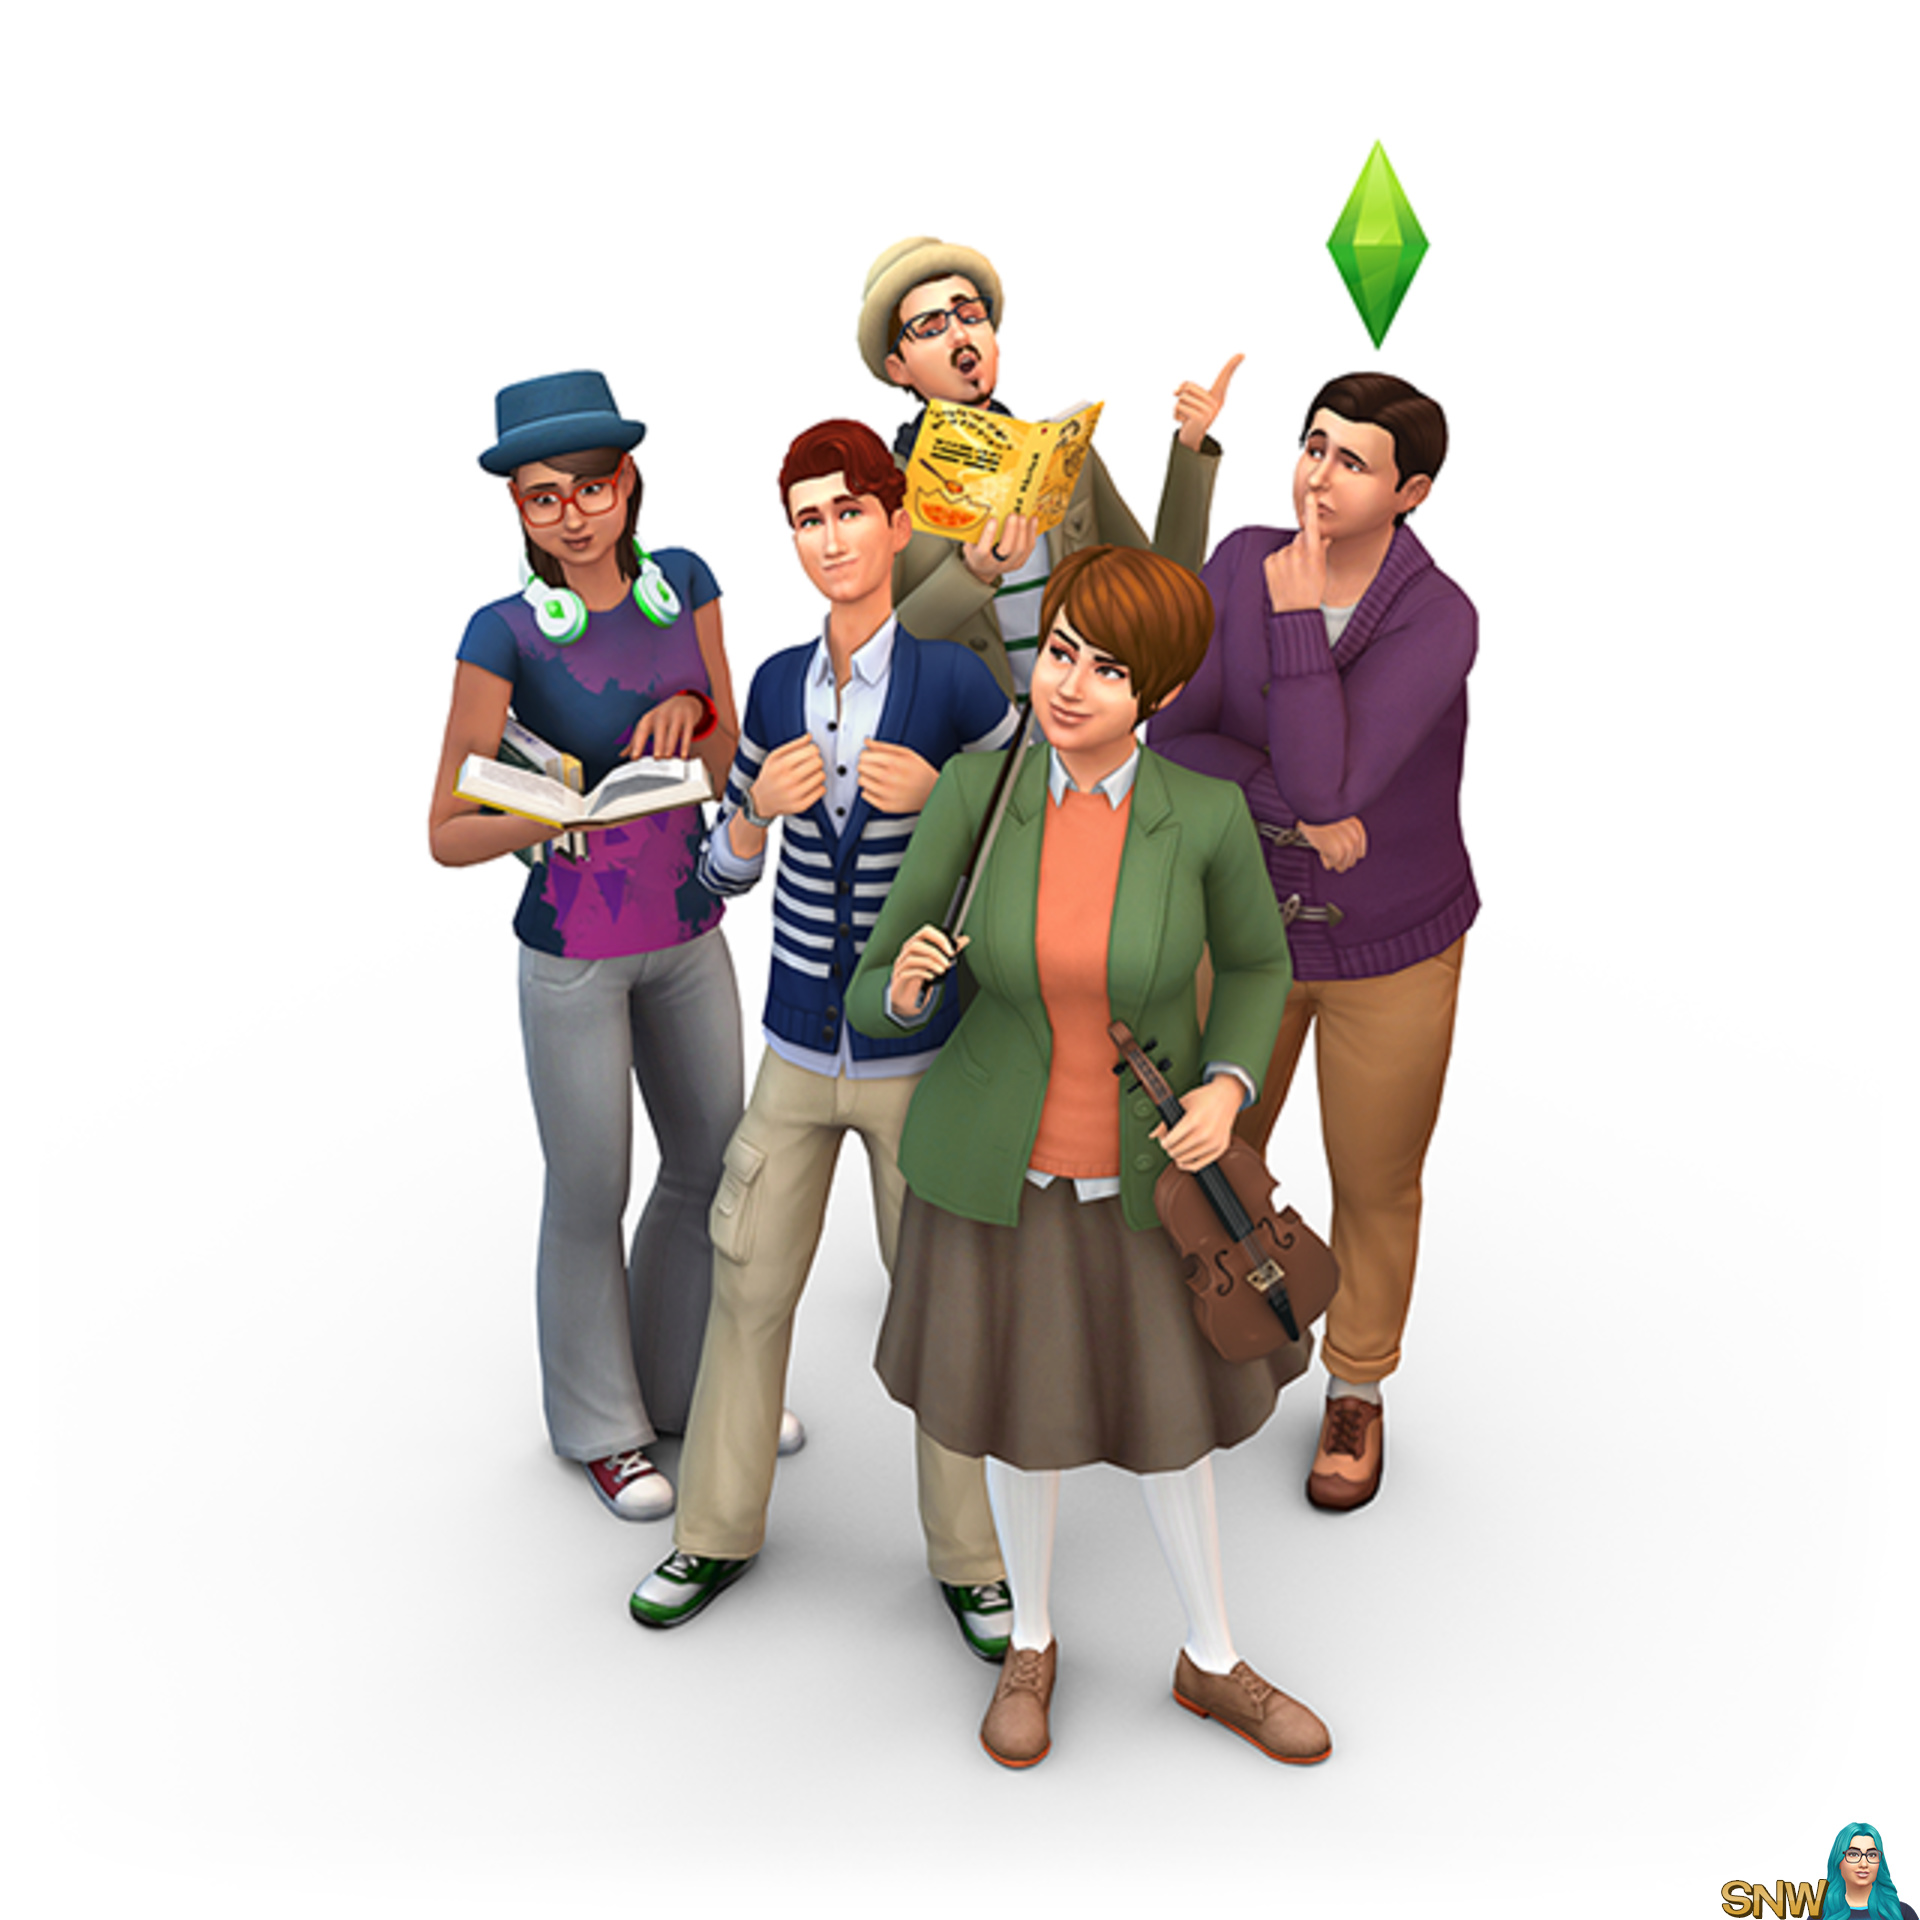 The Sims 4: Get Together render